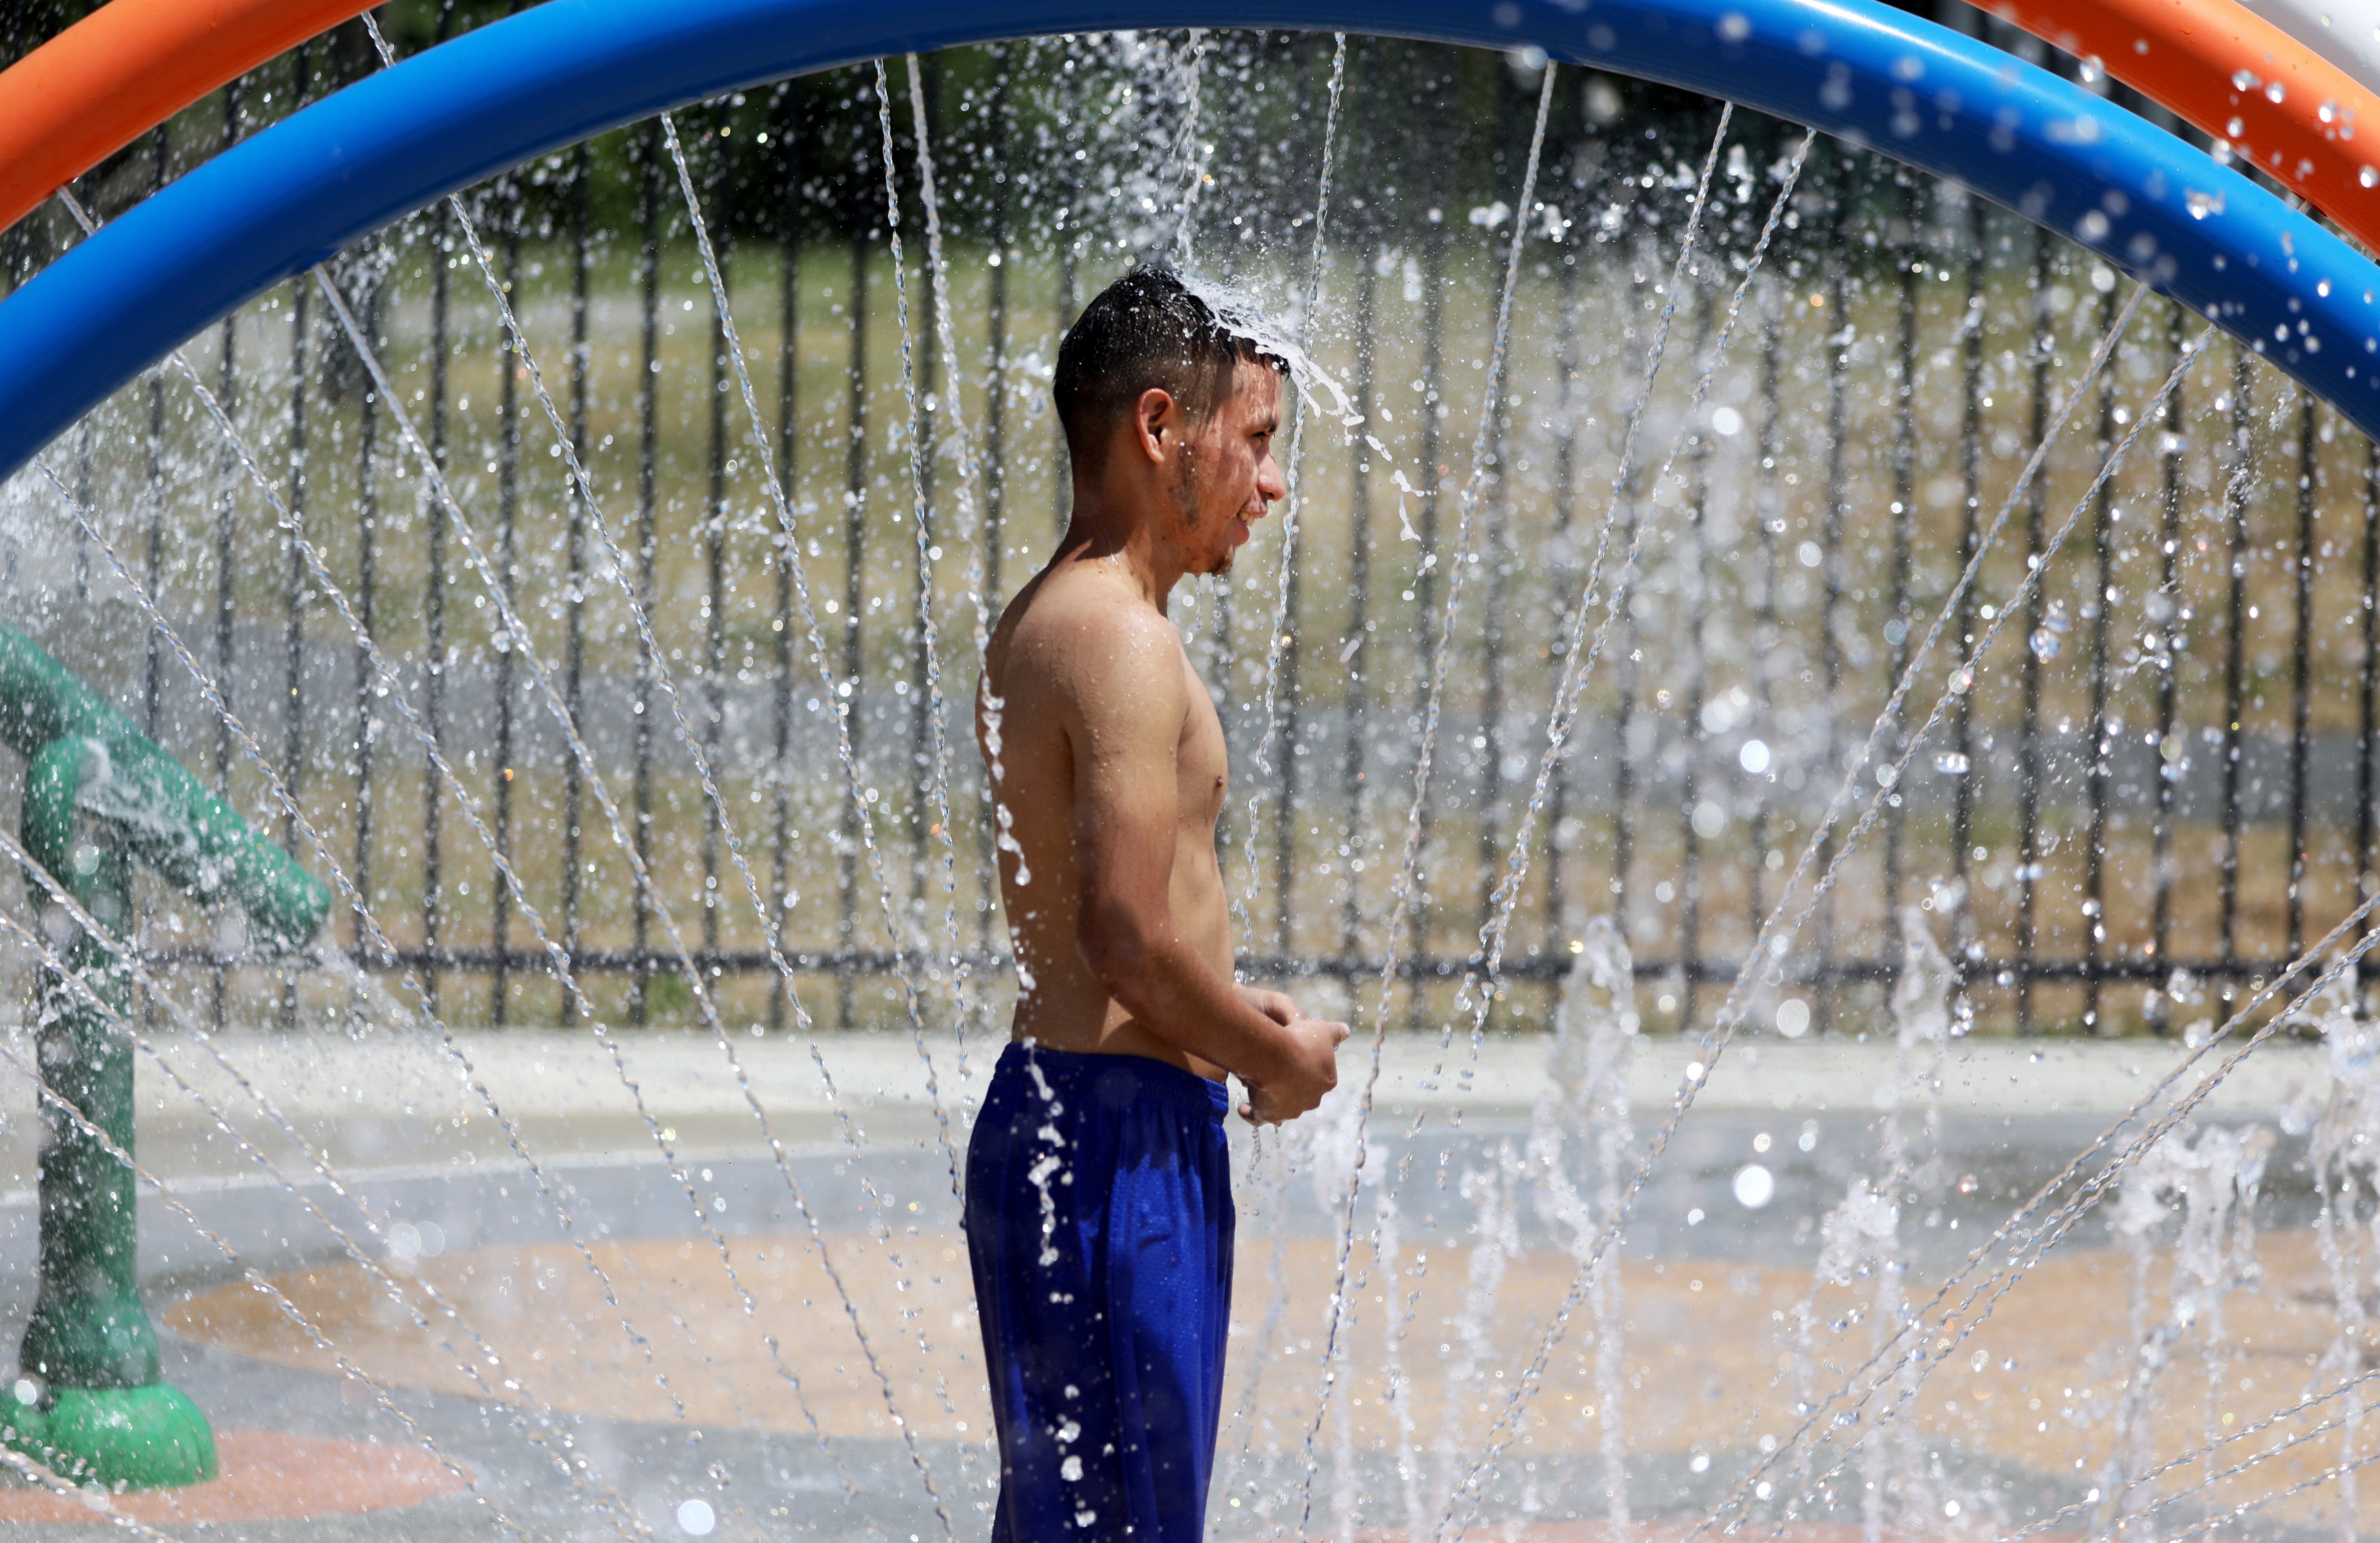 Beat the heat wave: Pools, spraygrounds and splash pads - WHYY